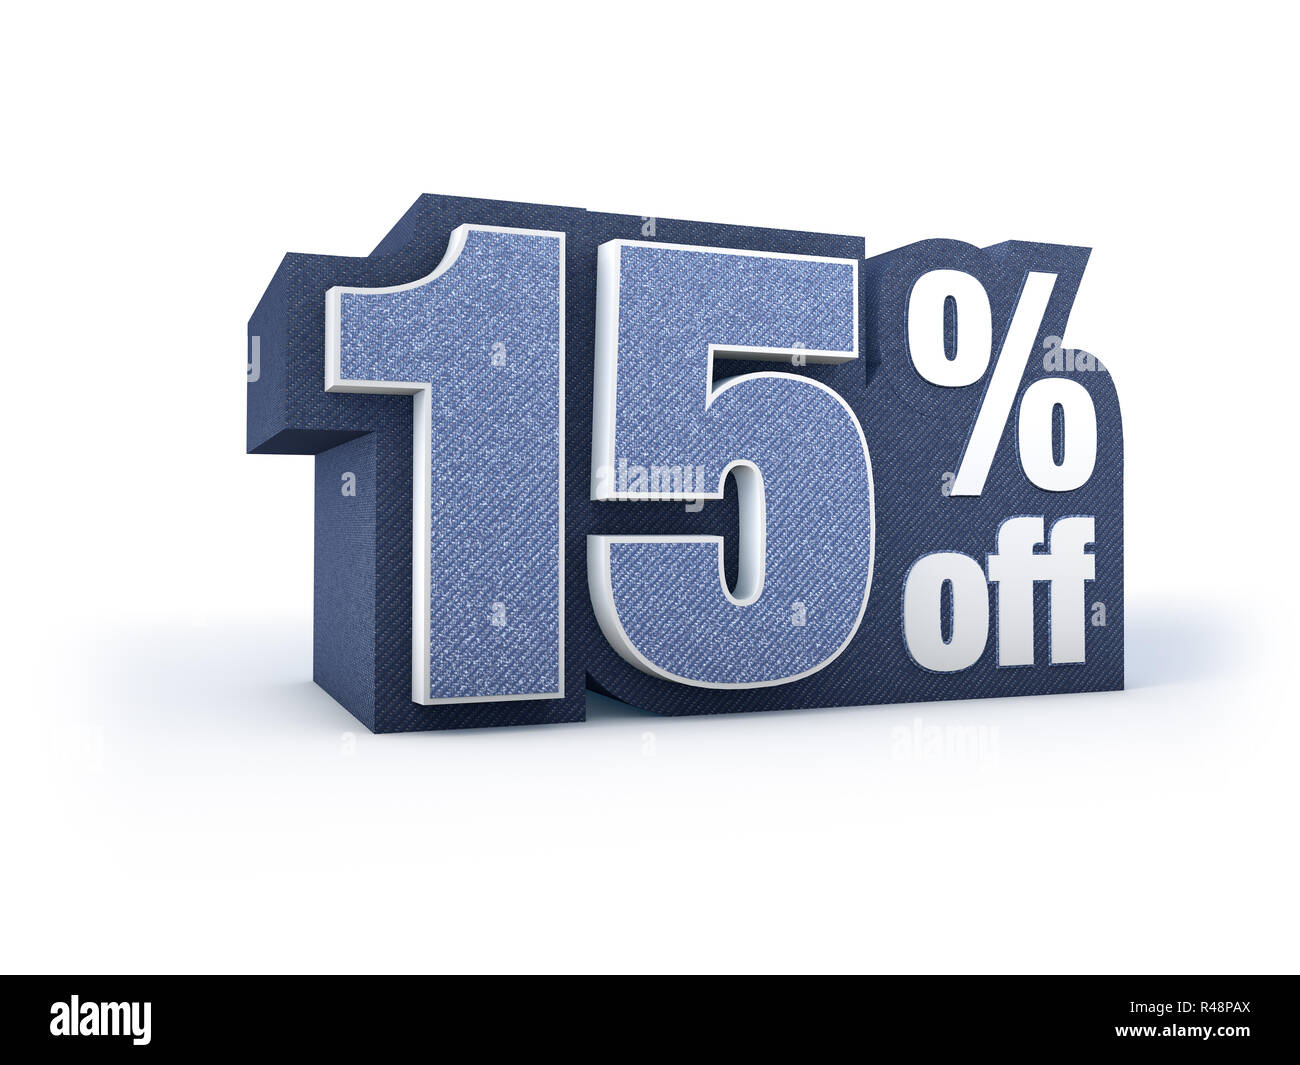 15 percent off denim styled discount price sign Stock Photo